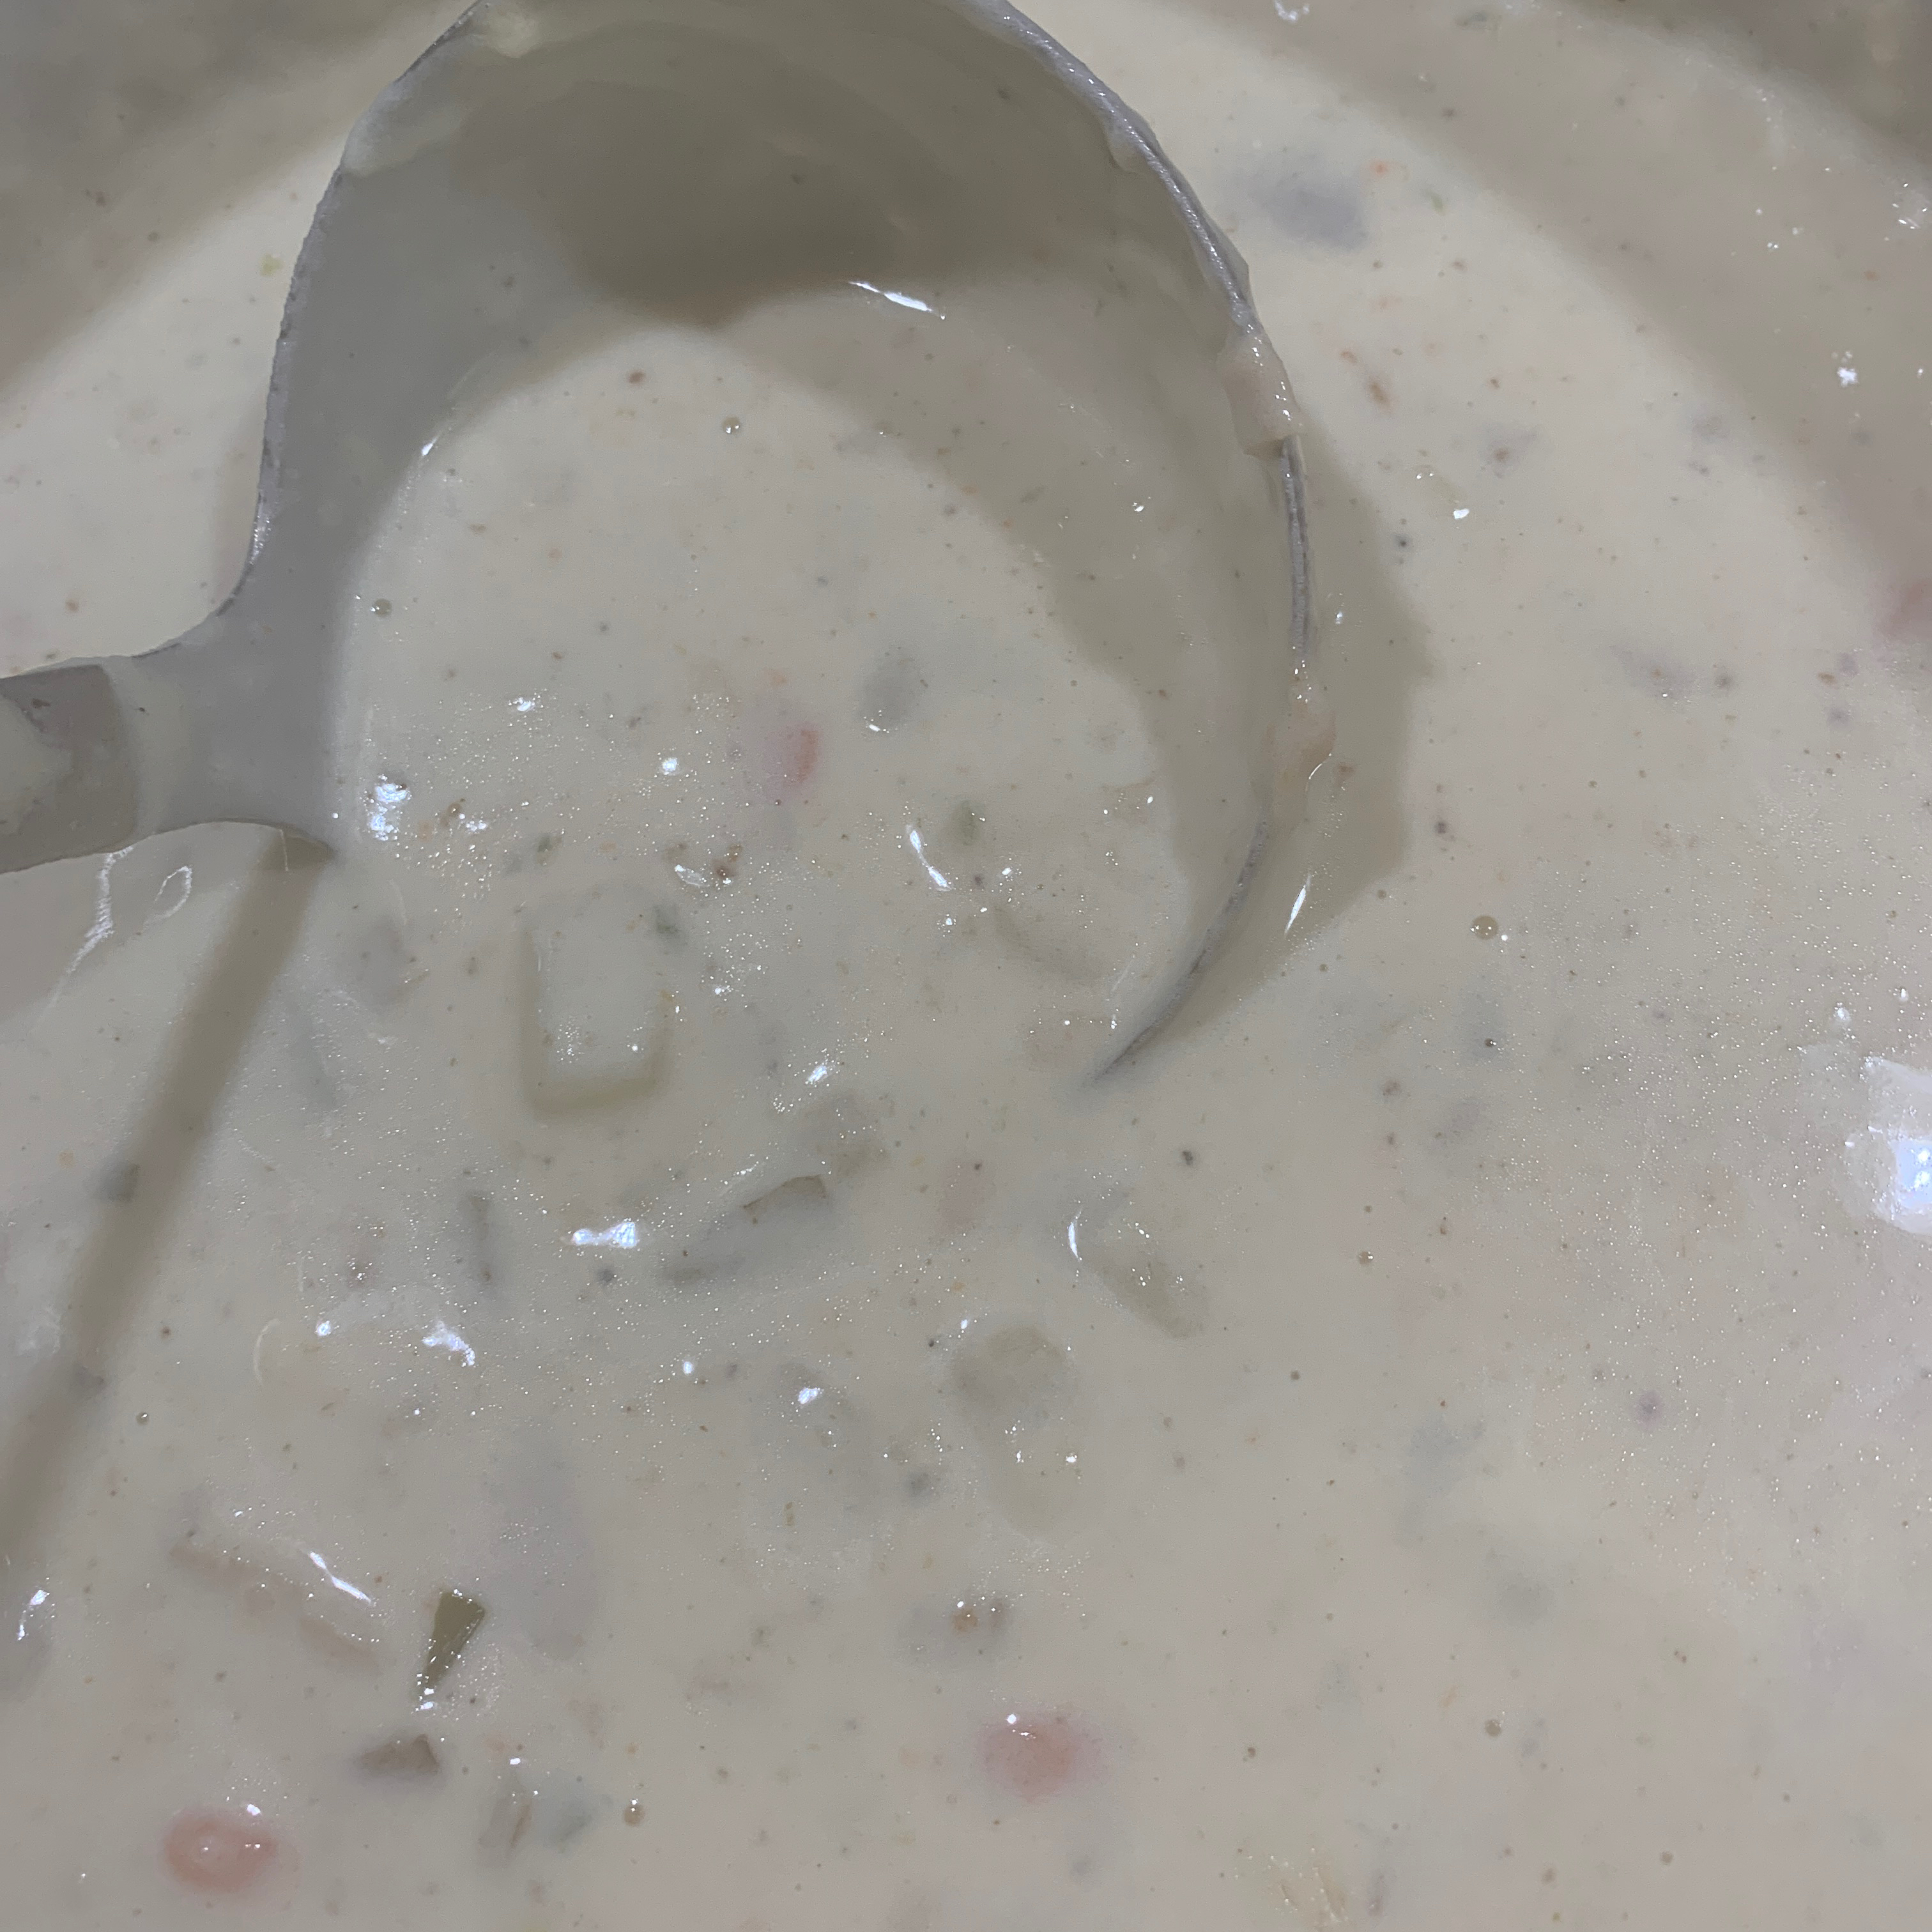 Cindy's Awesome Clam Chowder Karen R